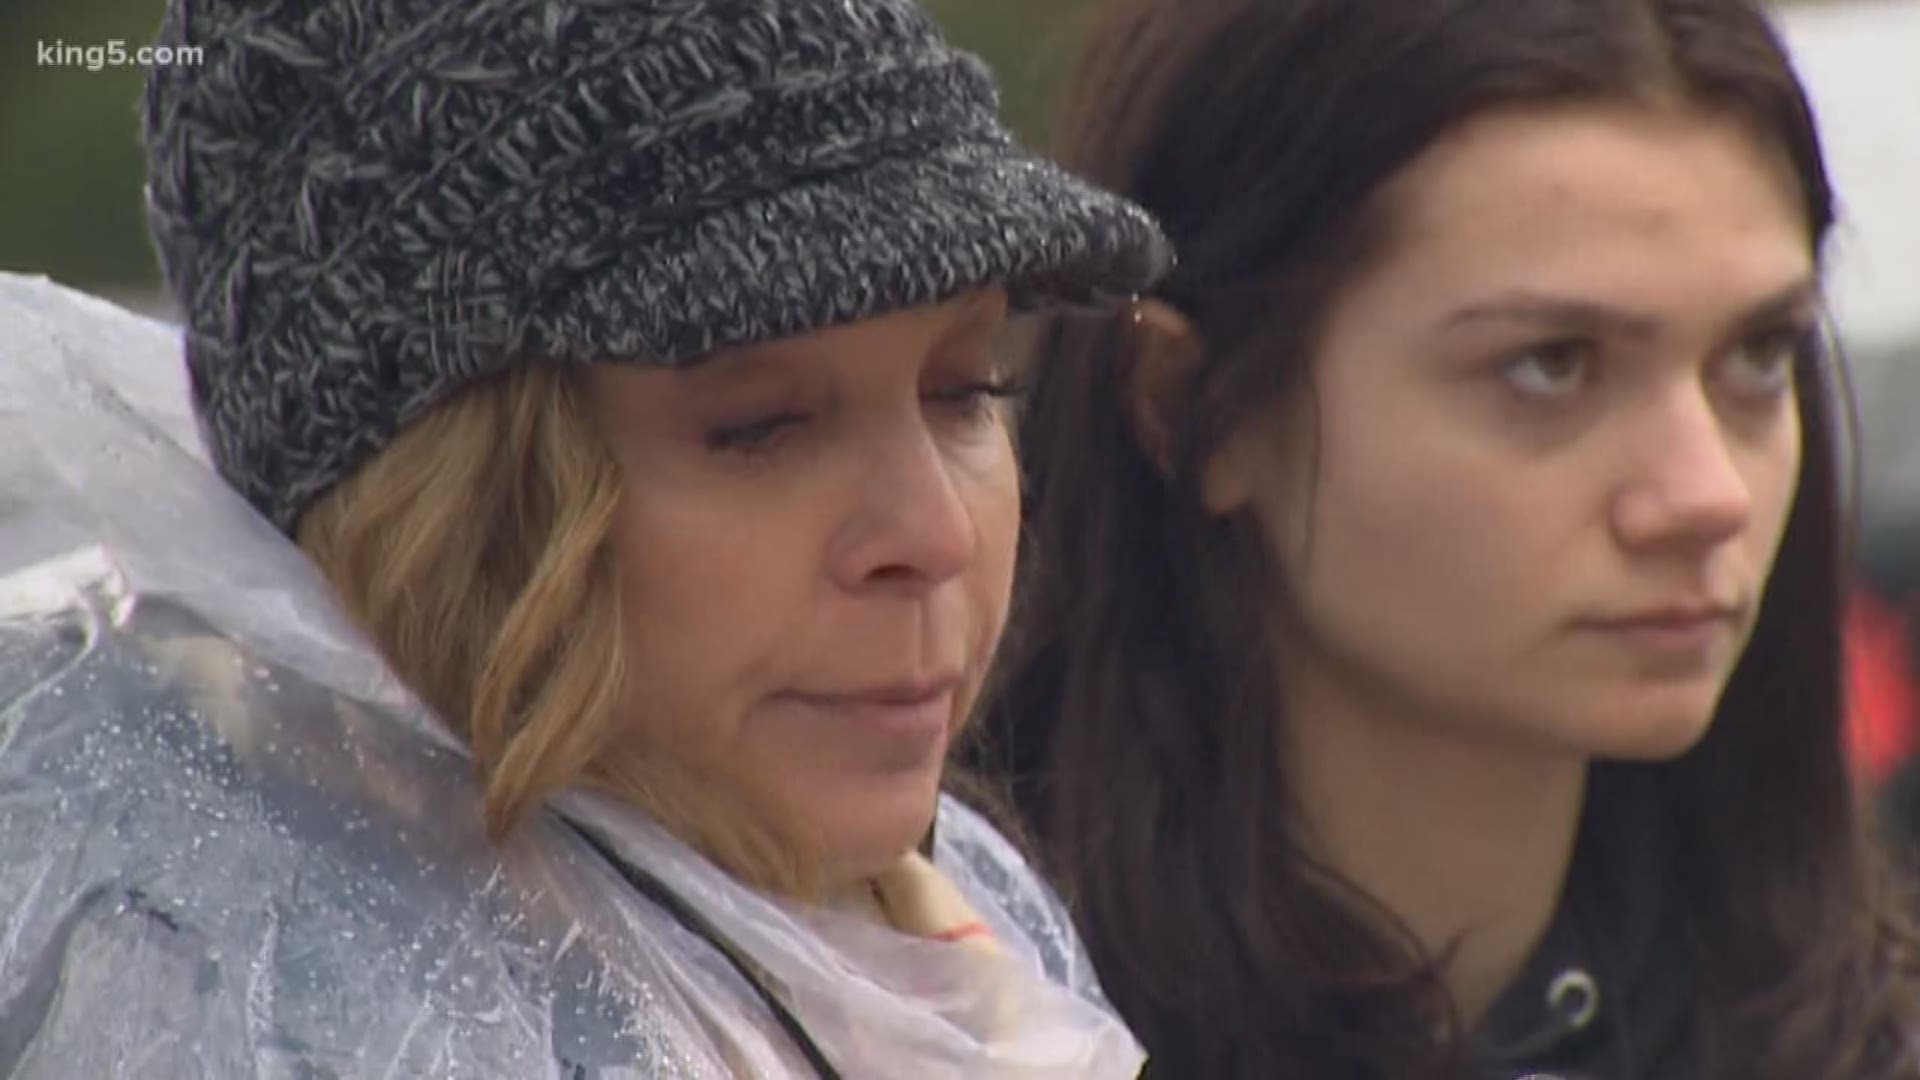 Groups working on suicide prevention in Washington say the state needs to do much more to prevent nearly 1,300 lives lost each year. KING 5's Ted Land talks with a mom and her daughter who share their story of a close call.